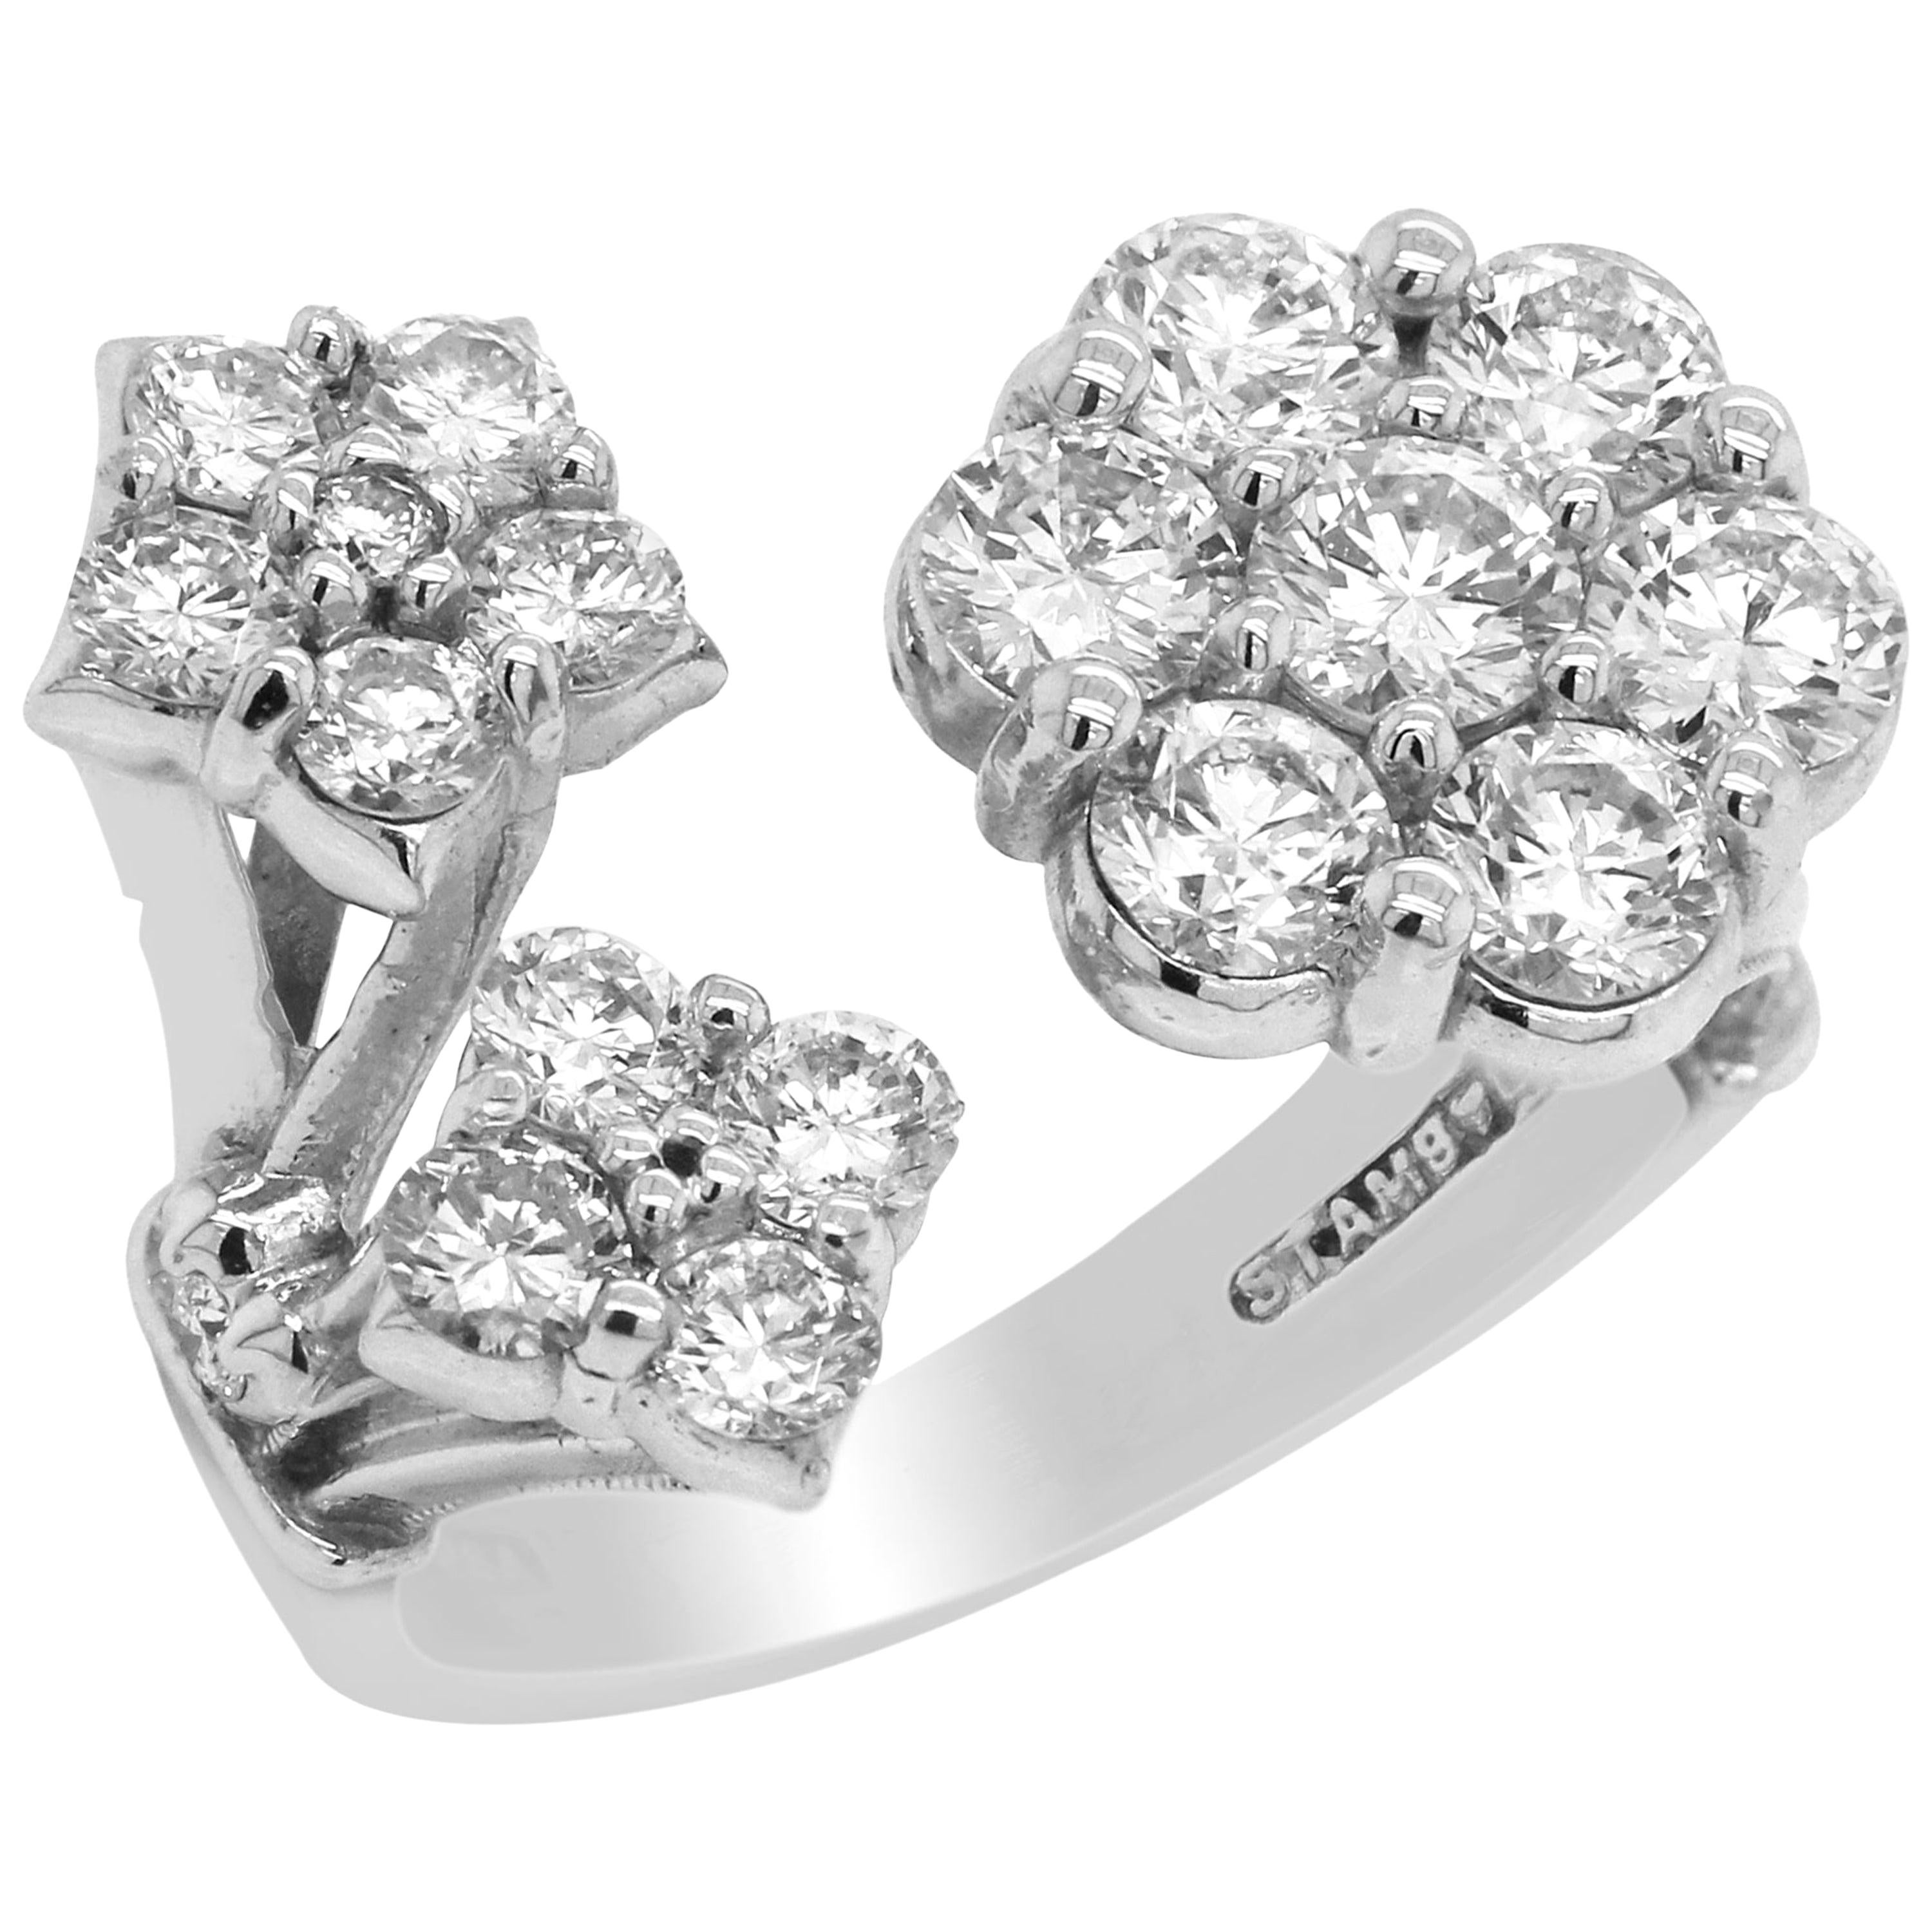 Stambolian 18K White Gold Diamond Cluster Floral Design Ring

2.17 carat G color, VS Clarity white diamonds

Face of the ring from left to right is 0.85 inch length. 0.75 inch width.

Size 6.5. Sizable by request.

Signed Stambolian and has the